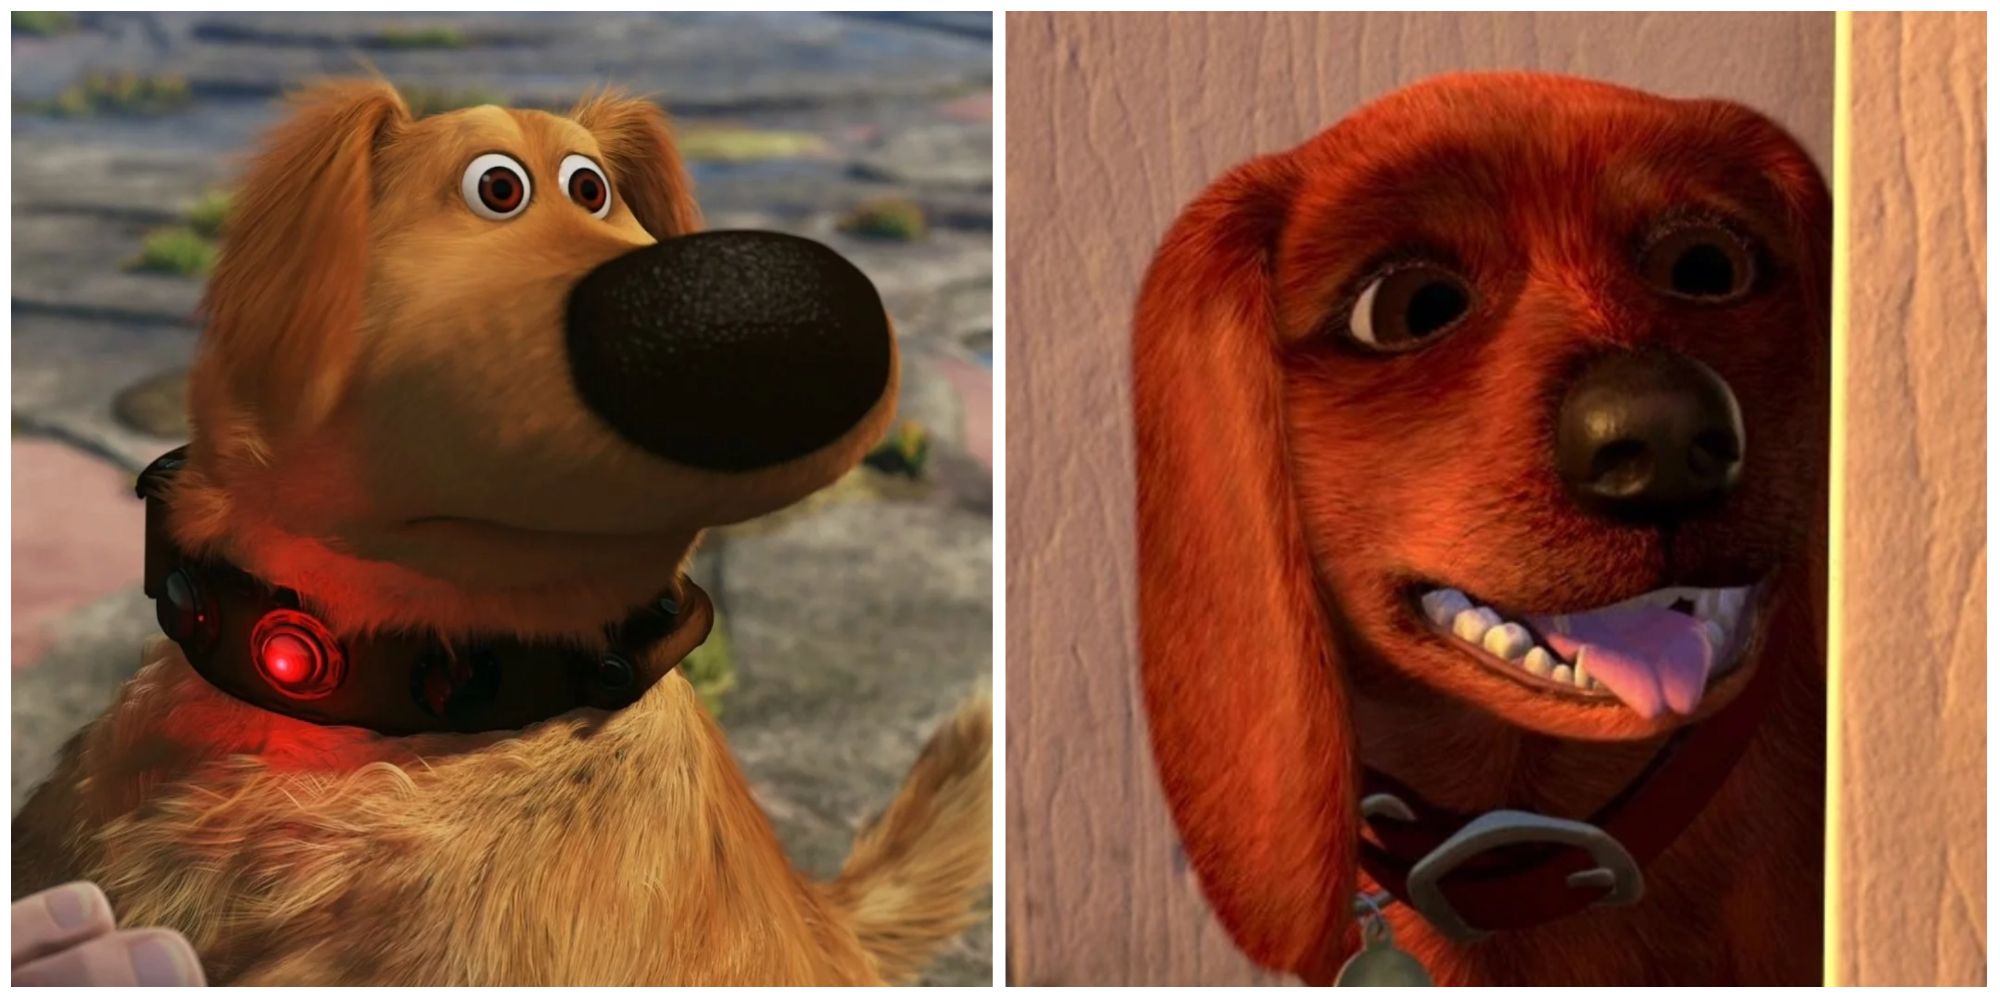 10 Best Dogs In Disney Movies Up Dug Toy Story Buster